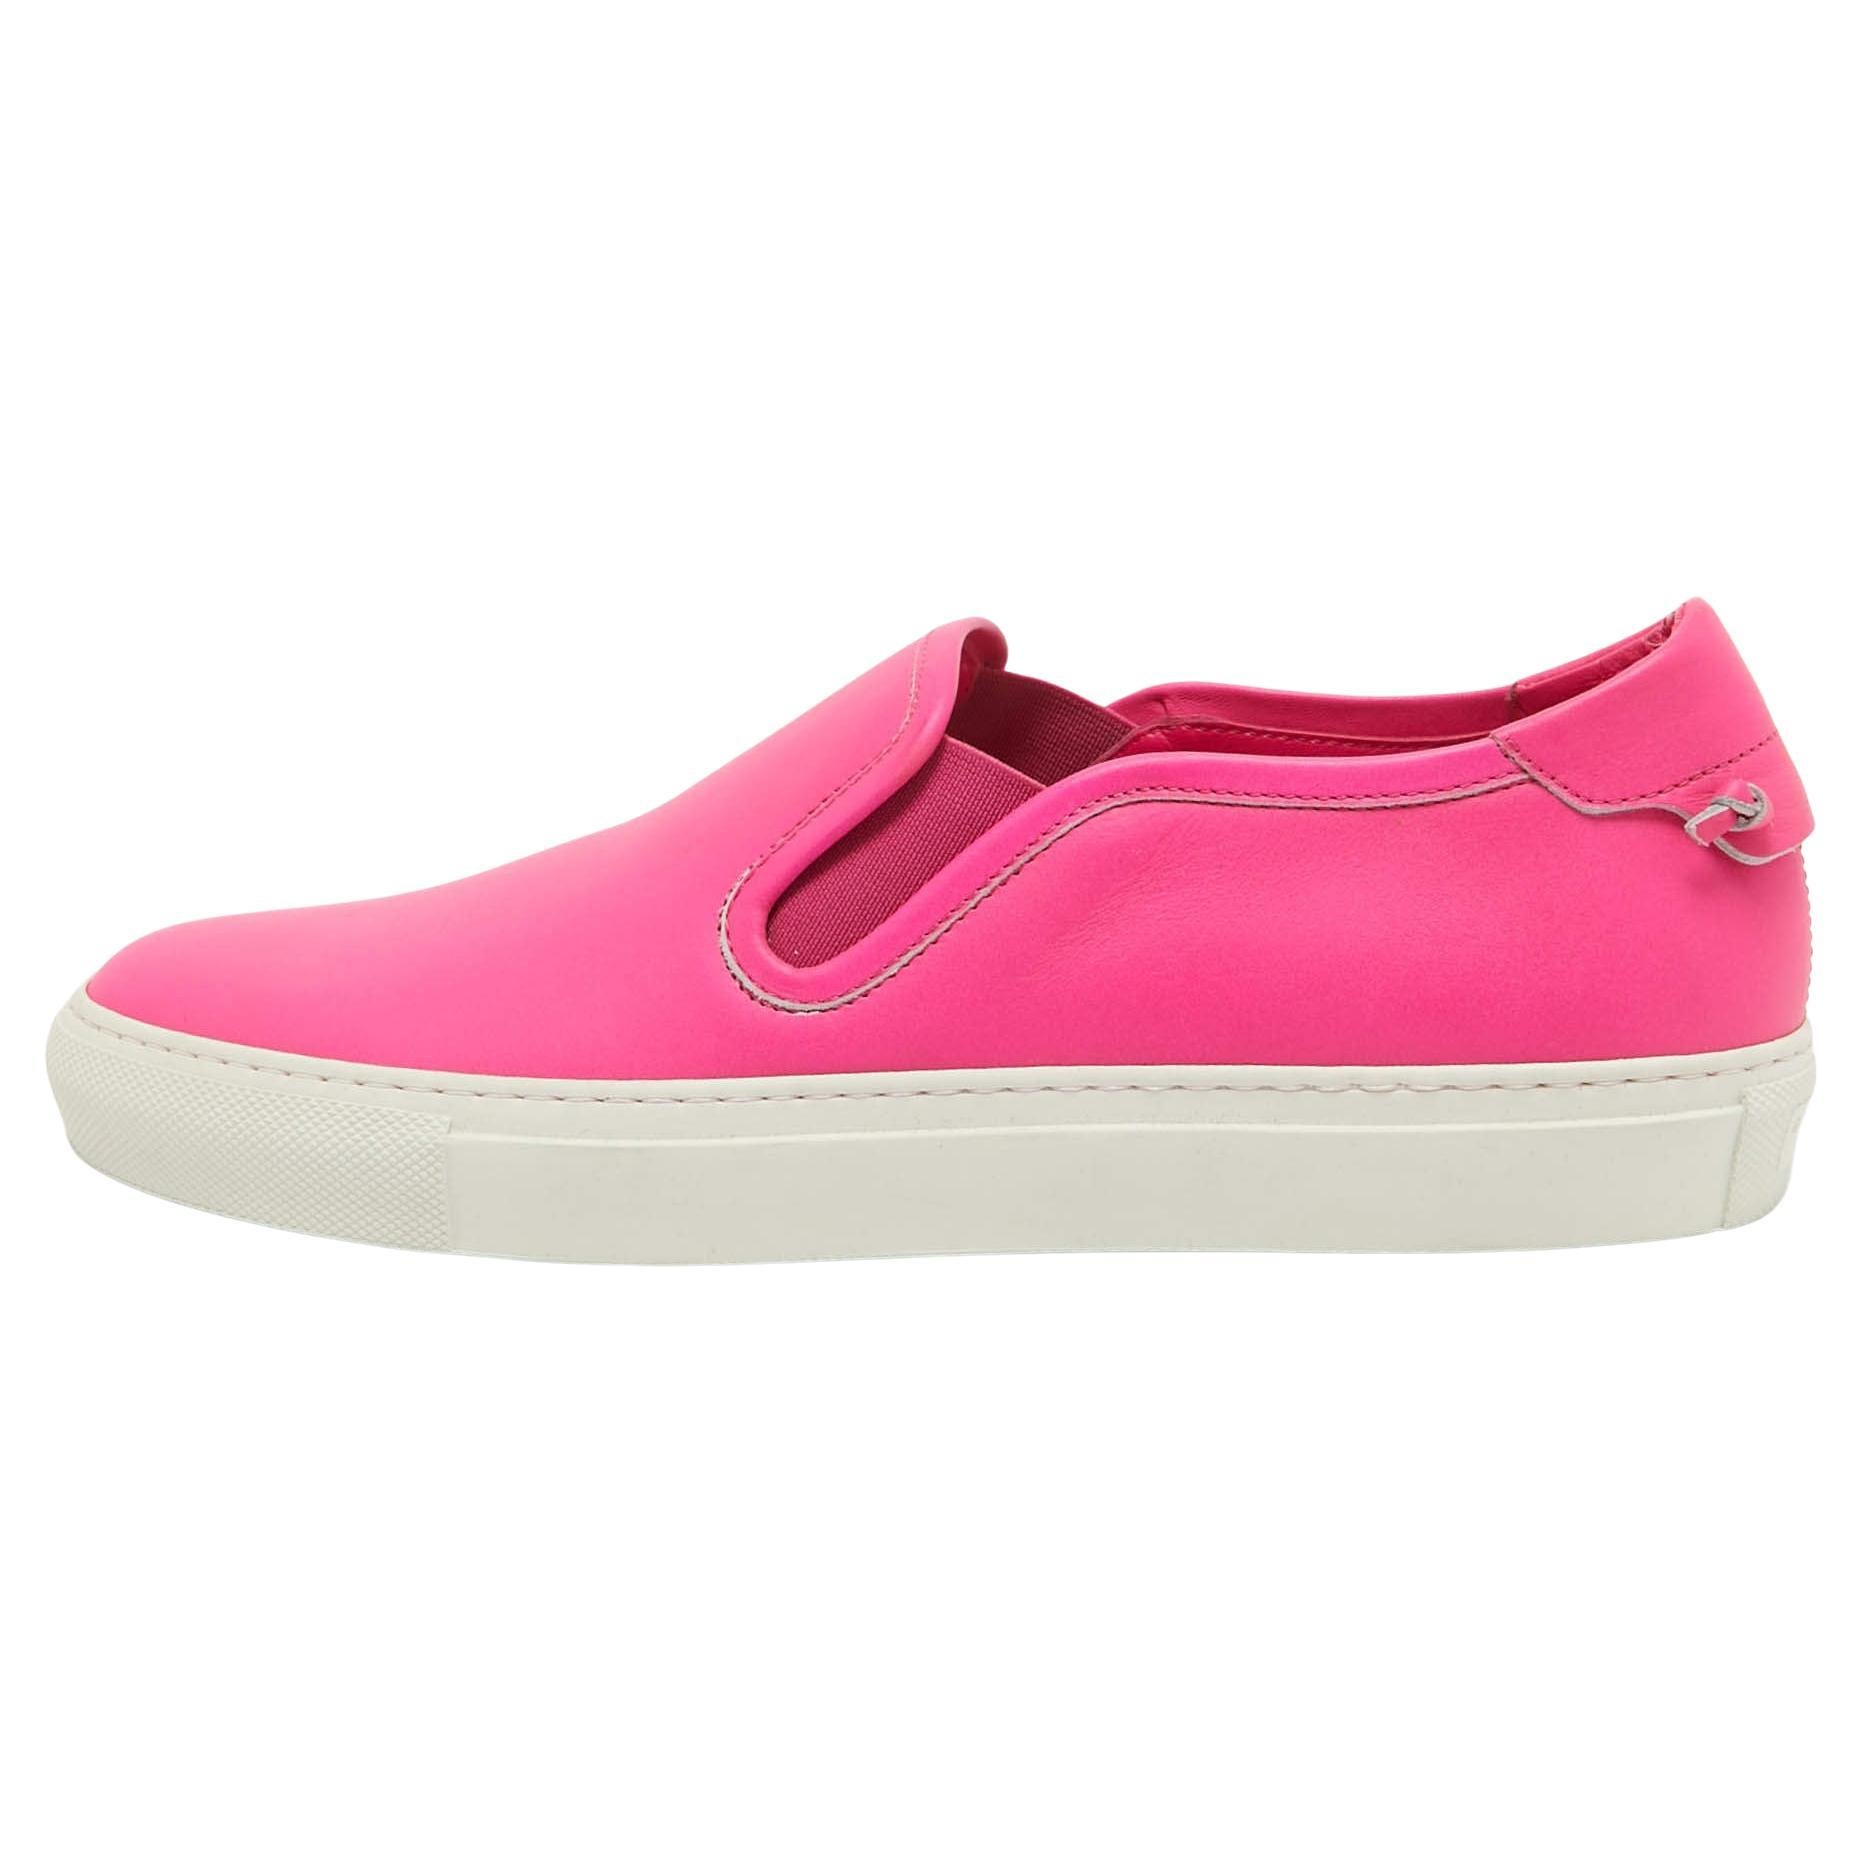 Givenchy Pink Leather Slip On Sneakers Size 40 For Sale